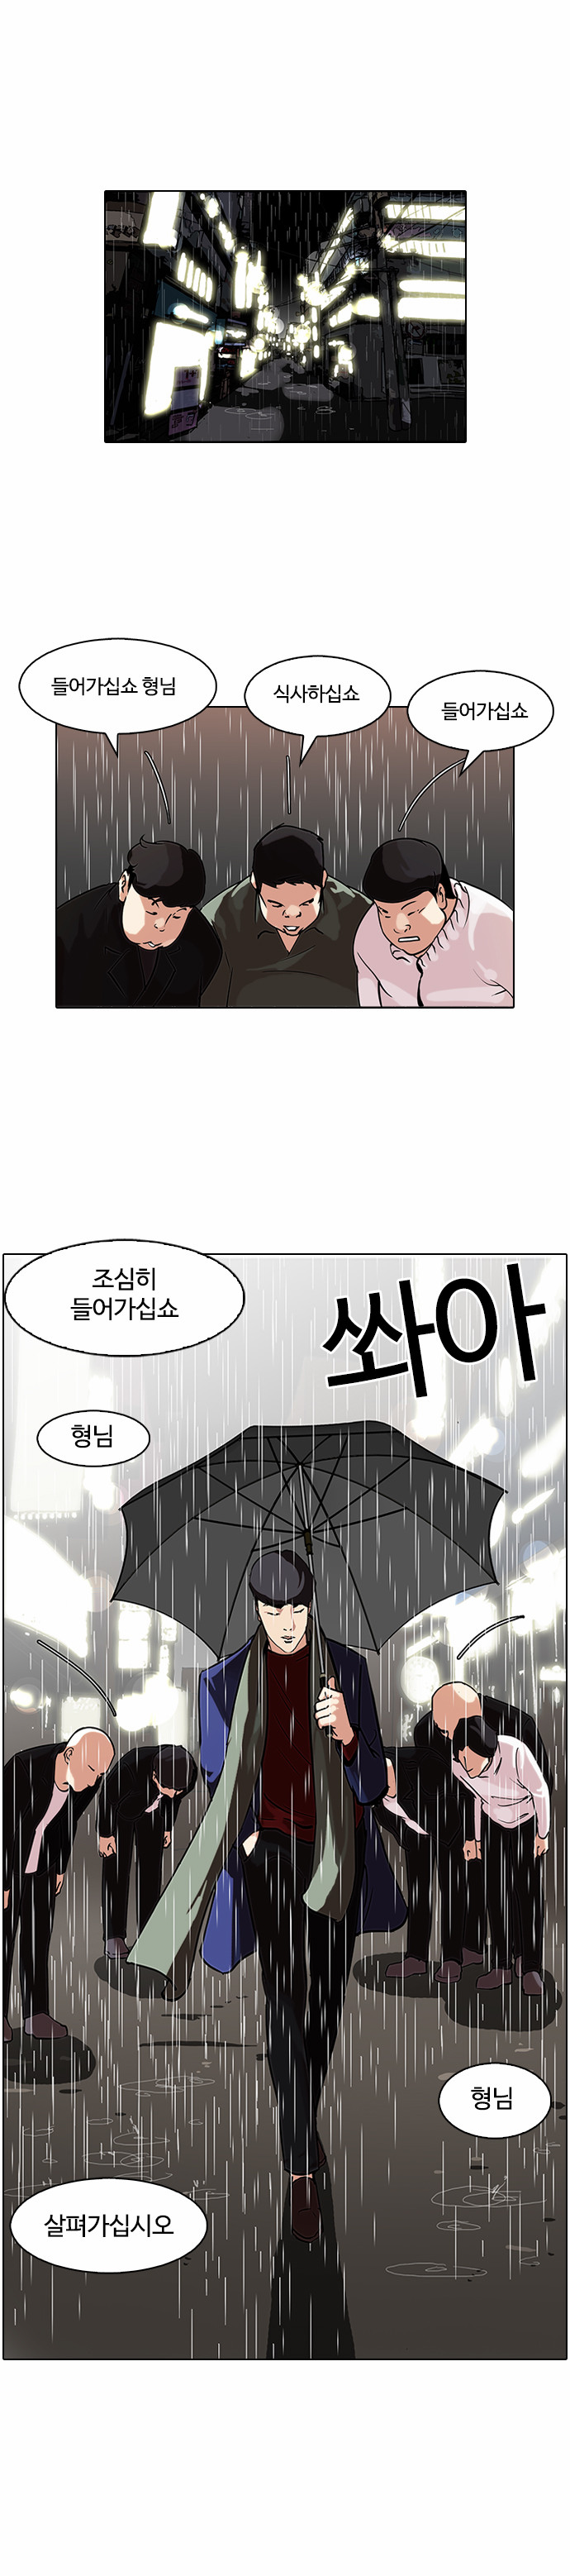 Lookism - Chapter 88 - Page 1